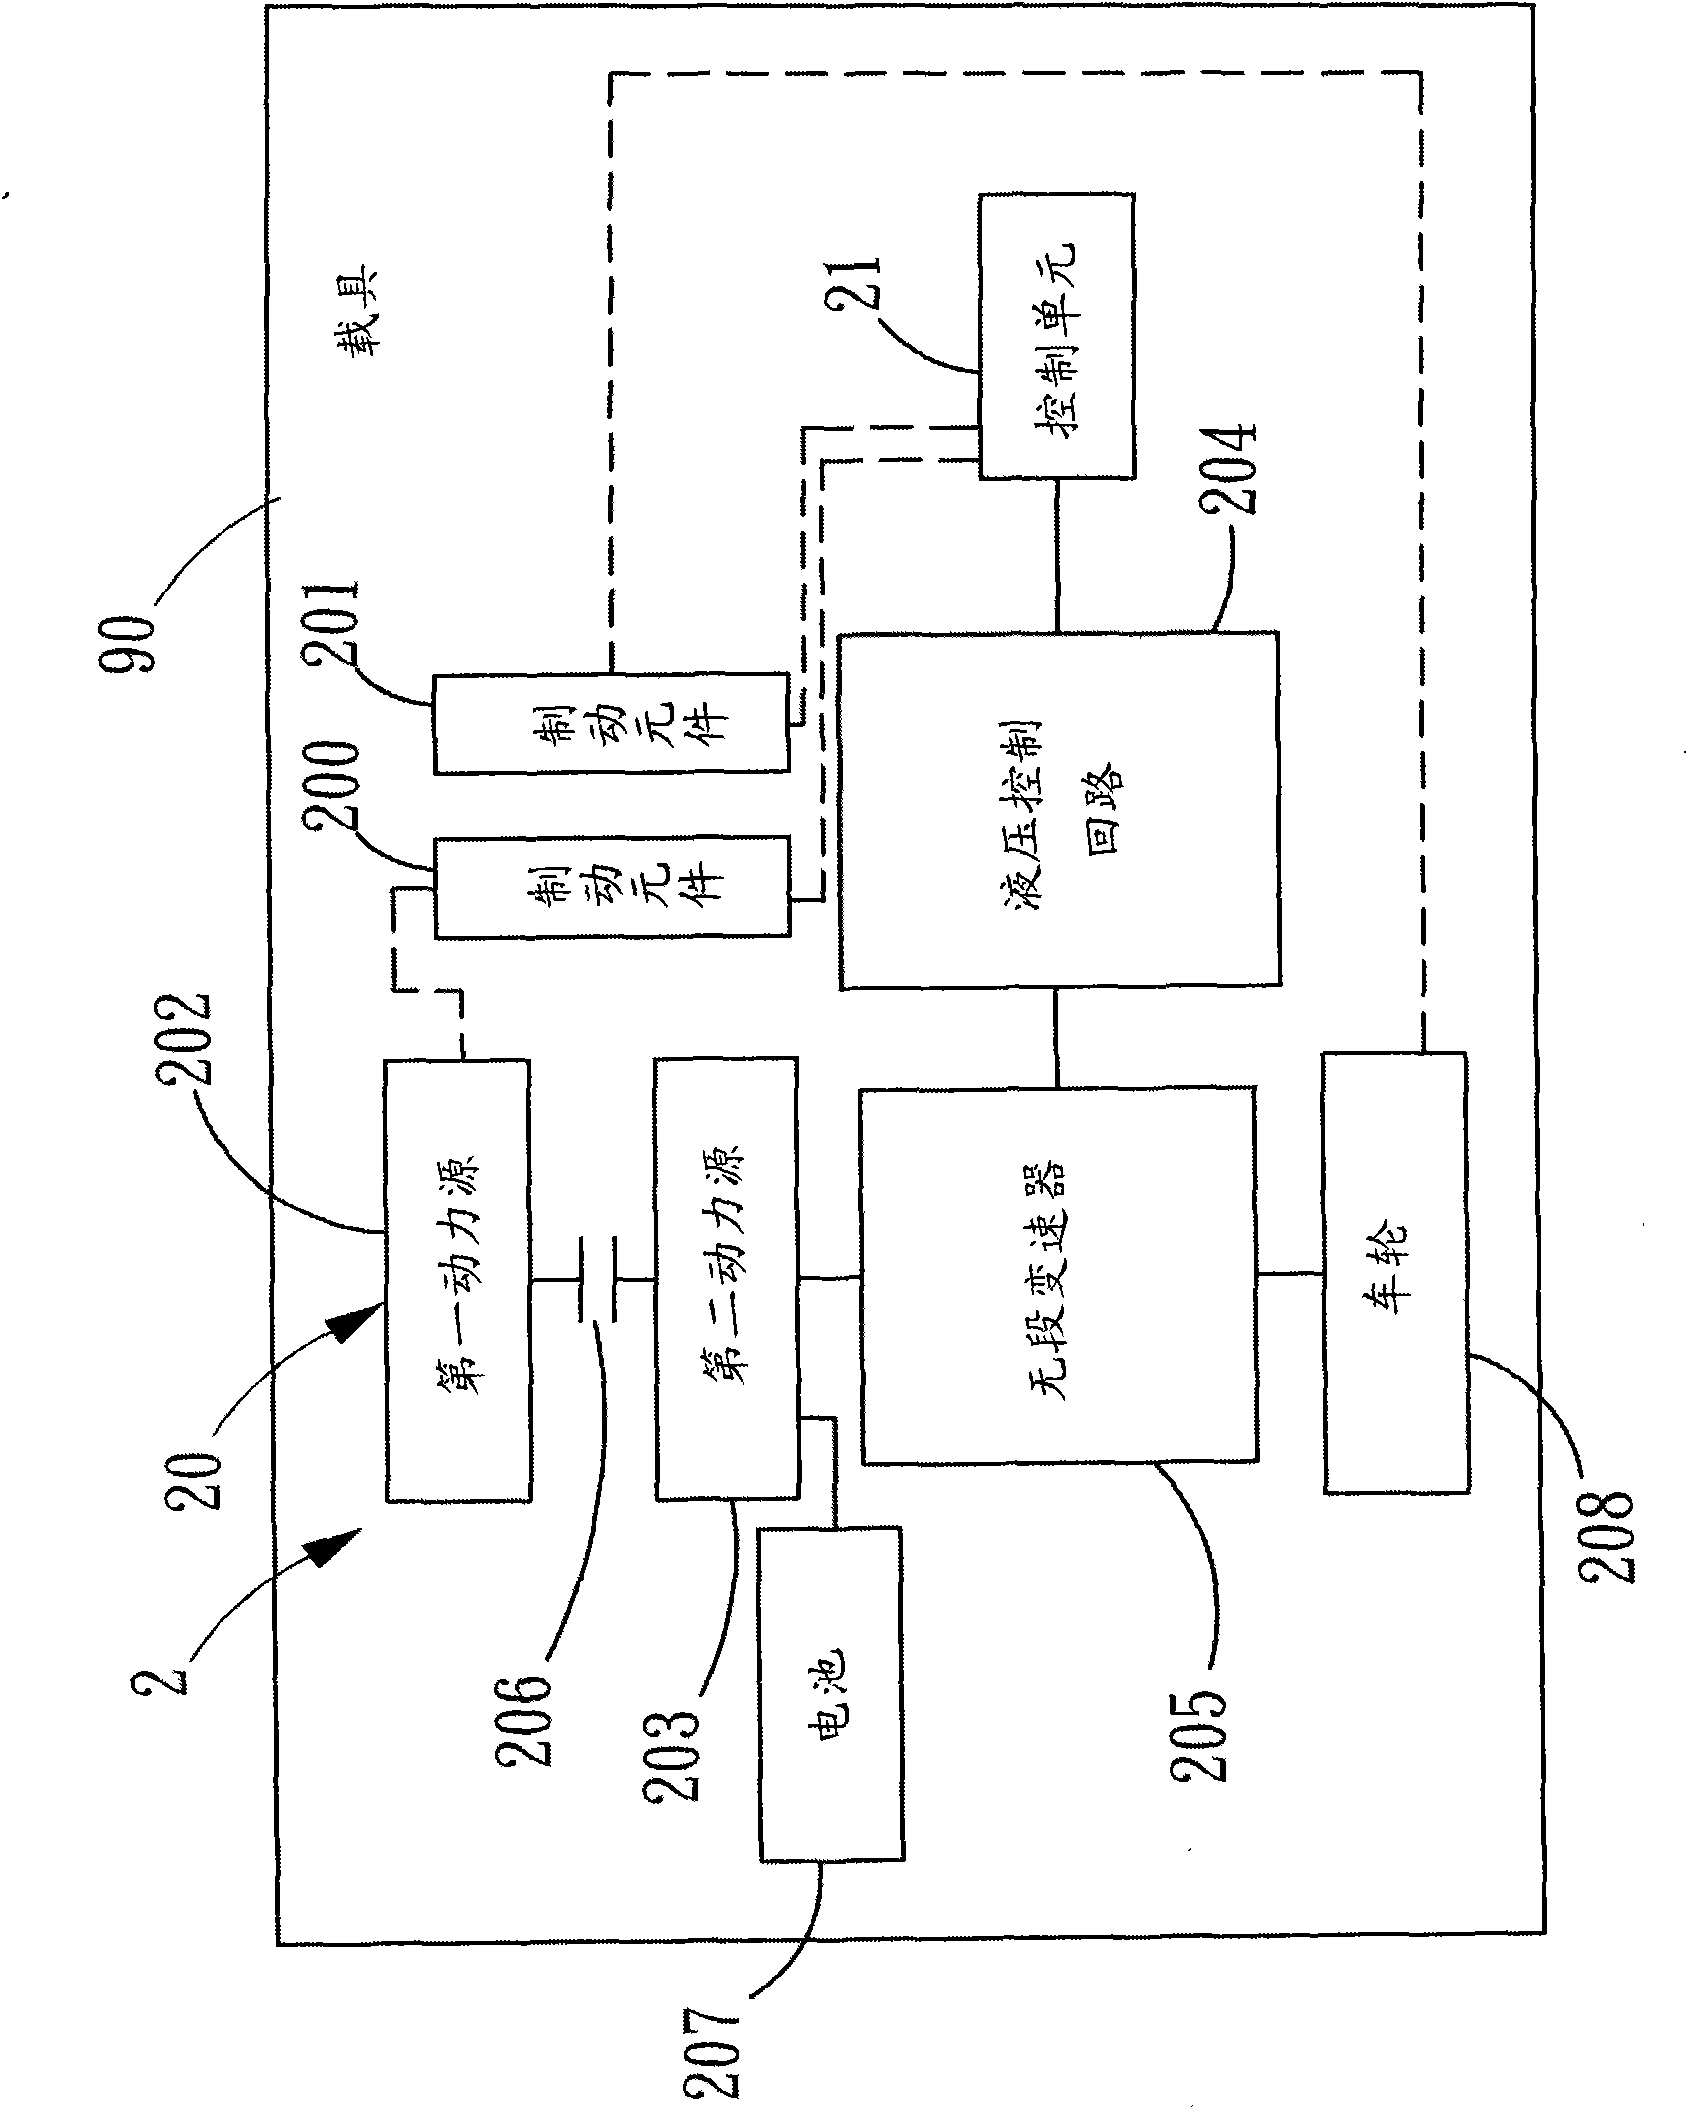 Control method and system for hydraulic control device of continuously variable speed transmission of hybrid power system